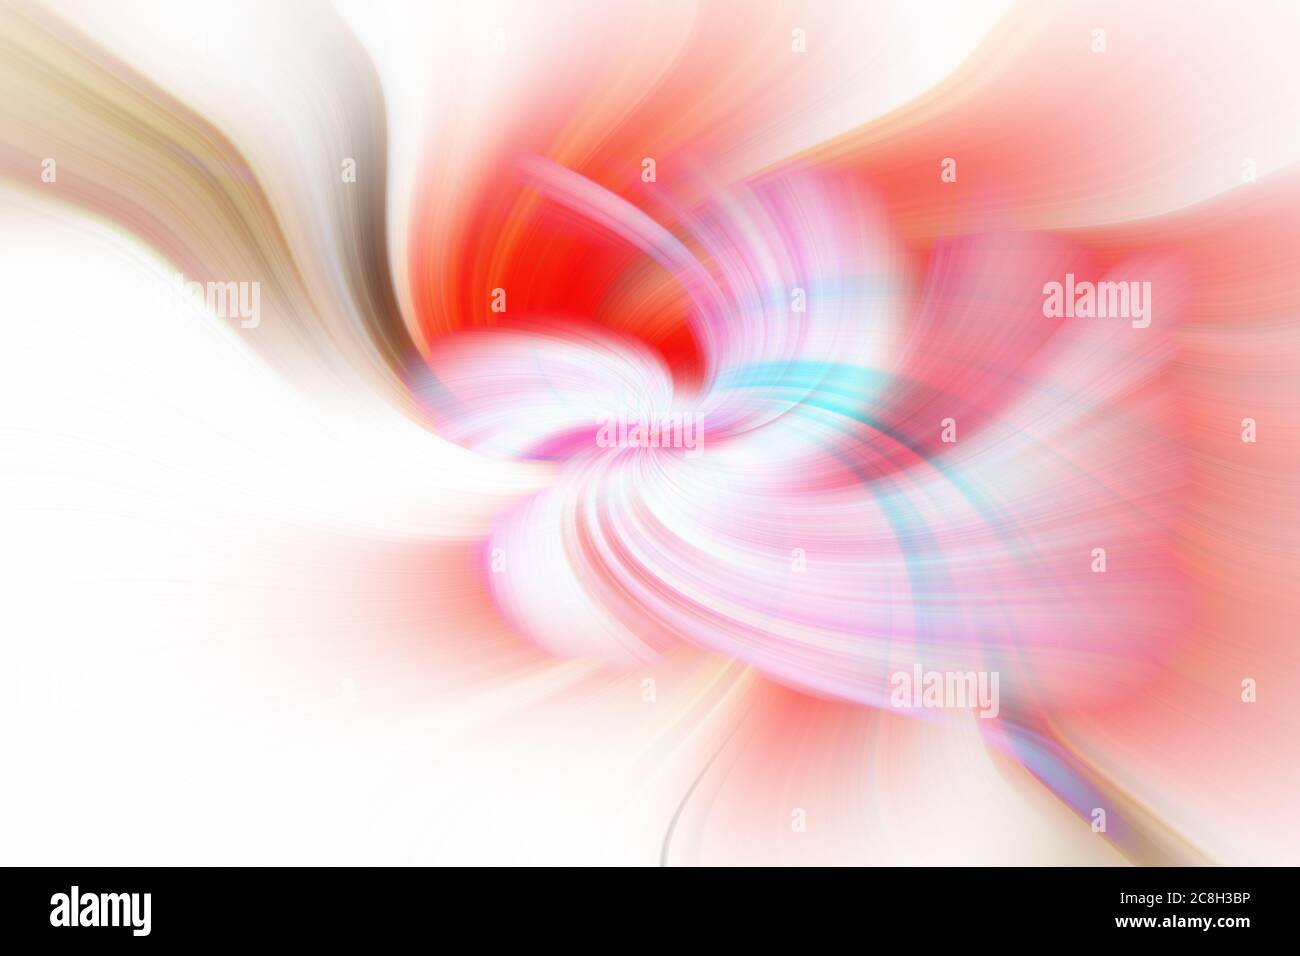 Visually abstract twisted light on a framed background. Powerful energy element with hypnotic effect. Cosmic waves. Very colorful. Stock Photo